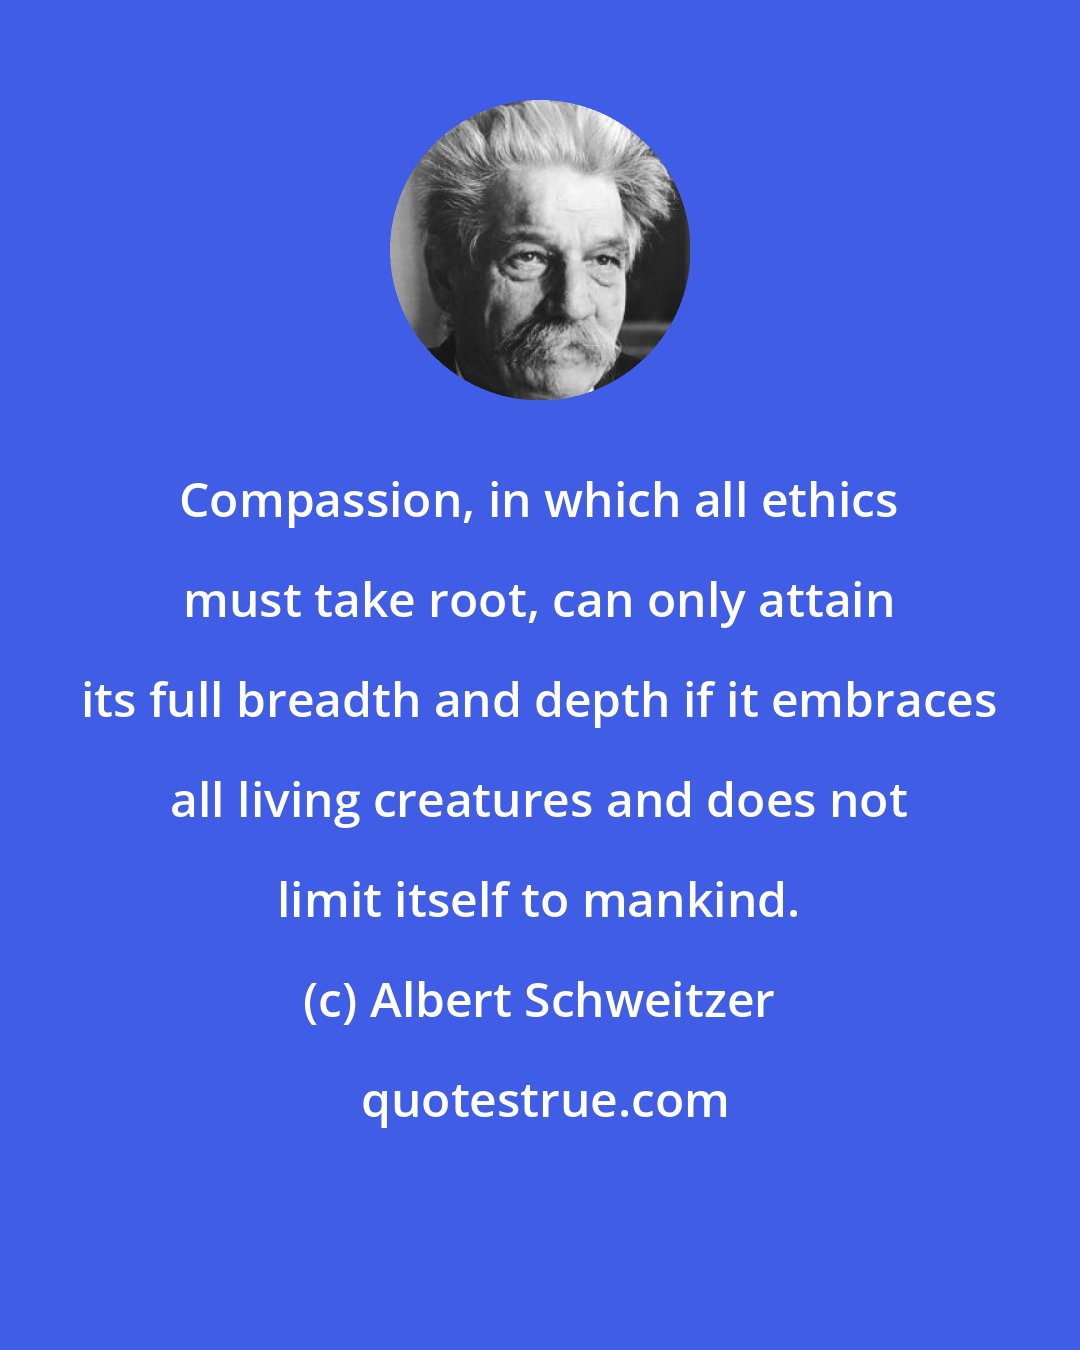 Albert Schweitzer: Compassion, in which all ethics must take root, can only attain its full breadth and depth if it embraces all living creatures and does not limit itself to mankind.